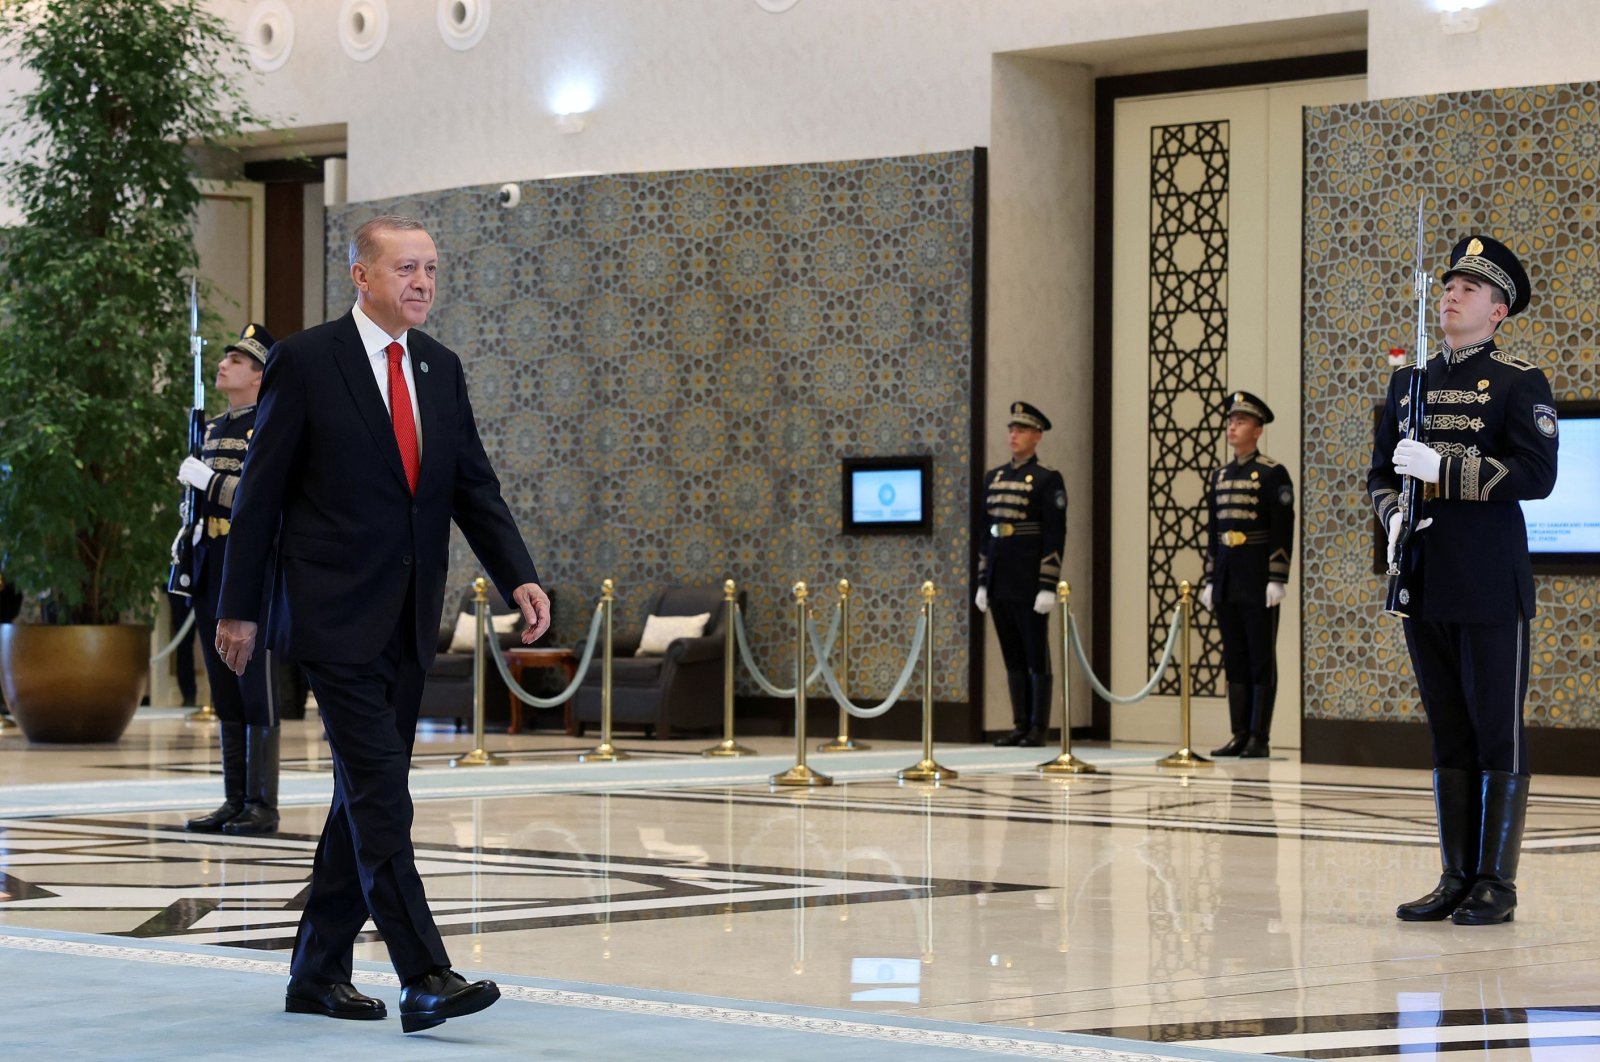 President Recep Tayyip Erdoğan attends the ninth summit of the Organization of Turkic States at the Eternal City Convention Center in Samarkand, Uzbekistan, Nov. 11, 2022. (AFP Photo)